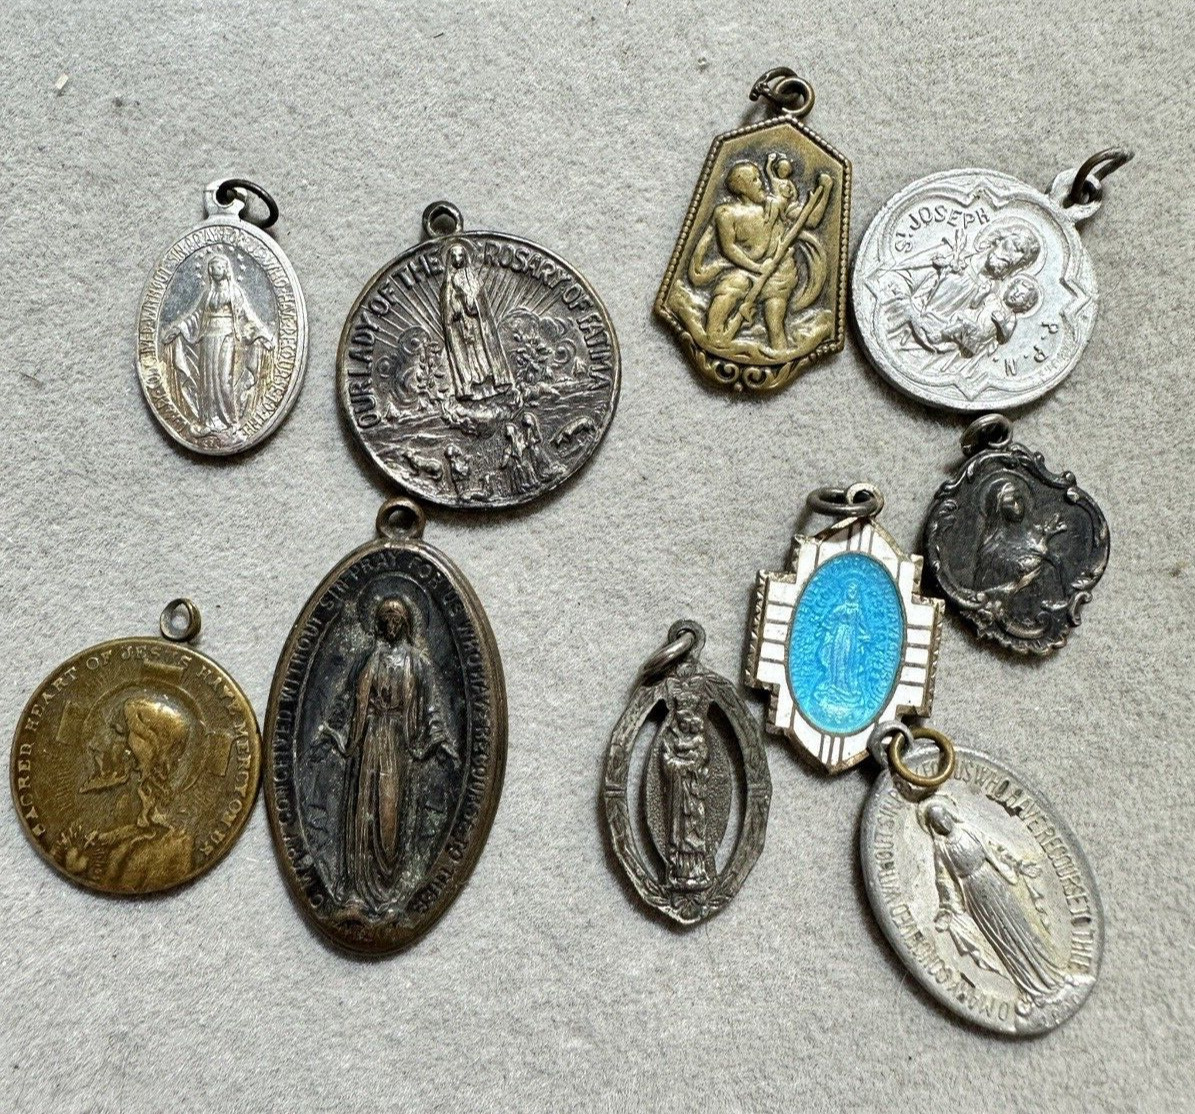 Vintage Catholic  Medals Lot 10 Piece Metal and Enamel Religious